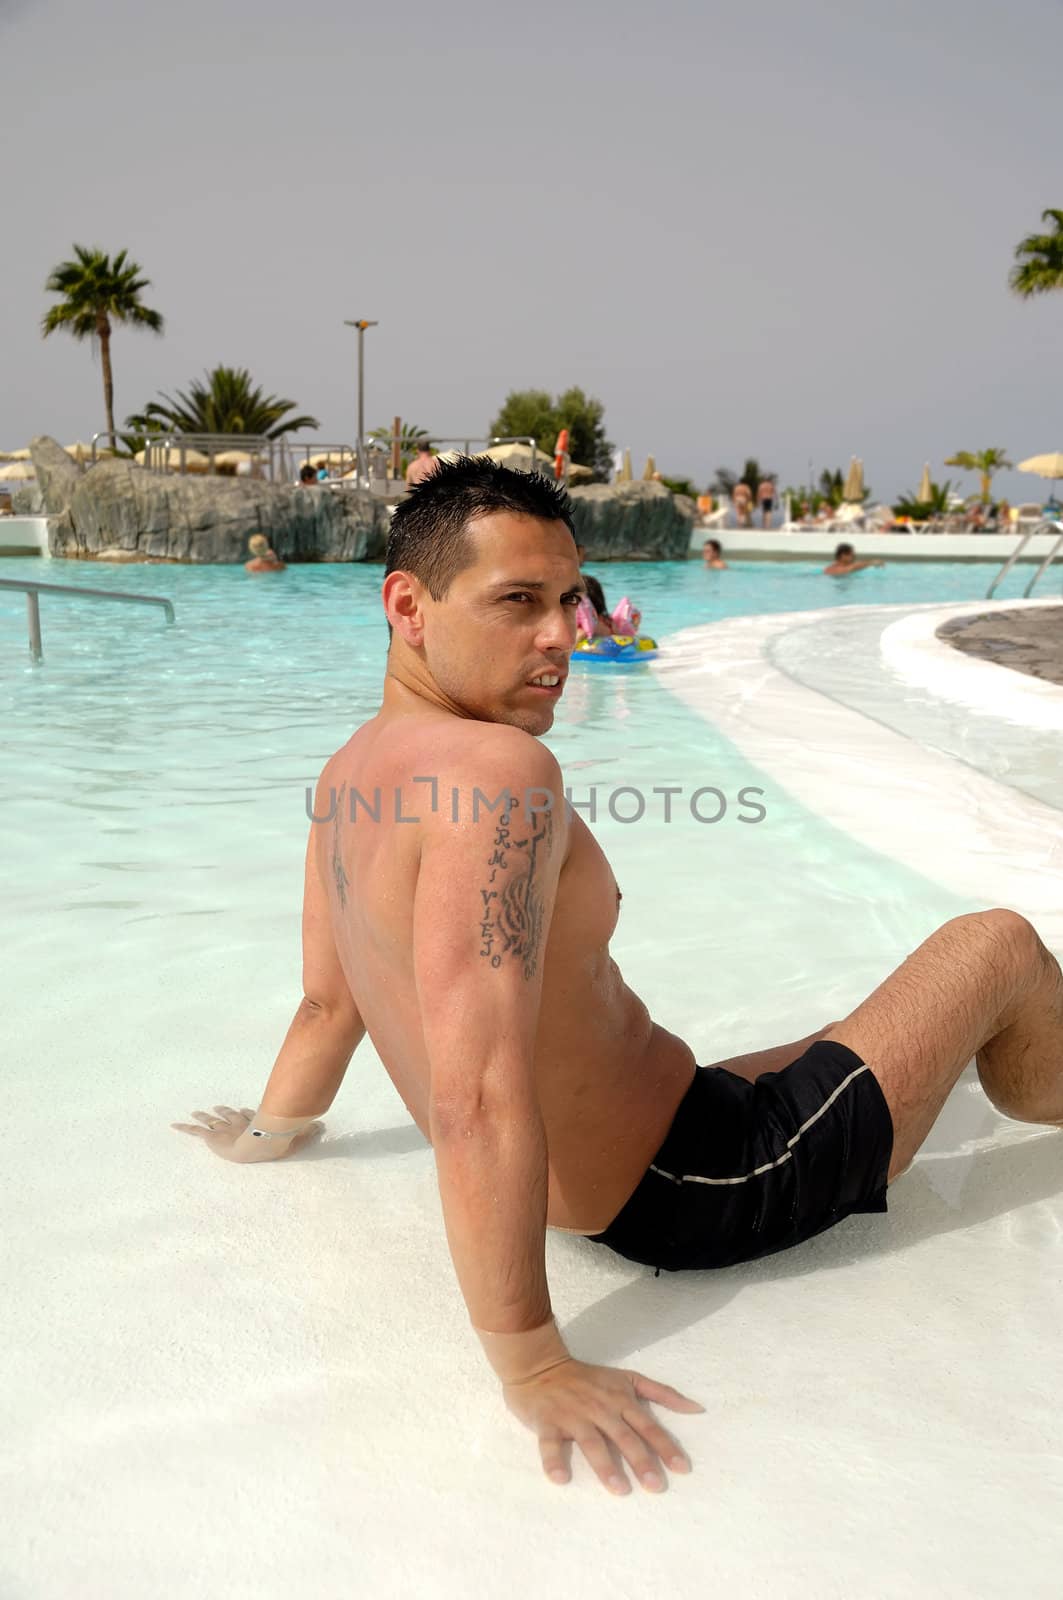 A man is relaxing in swimming pool